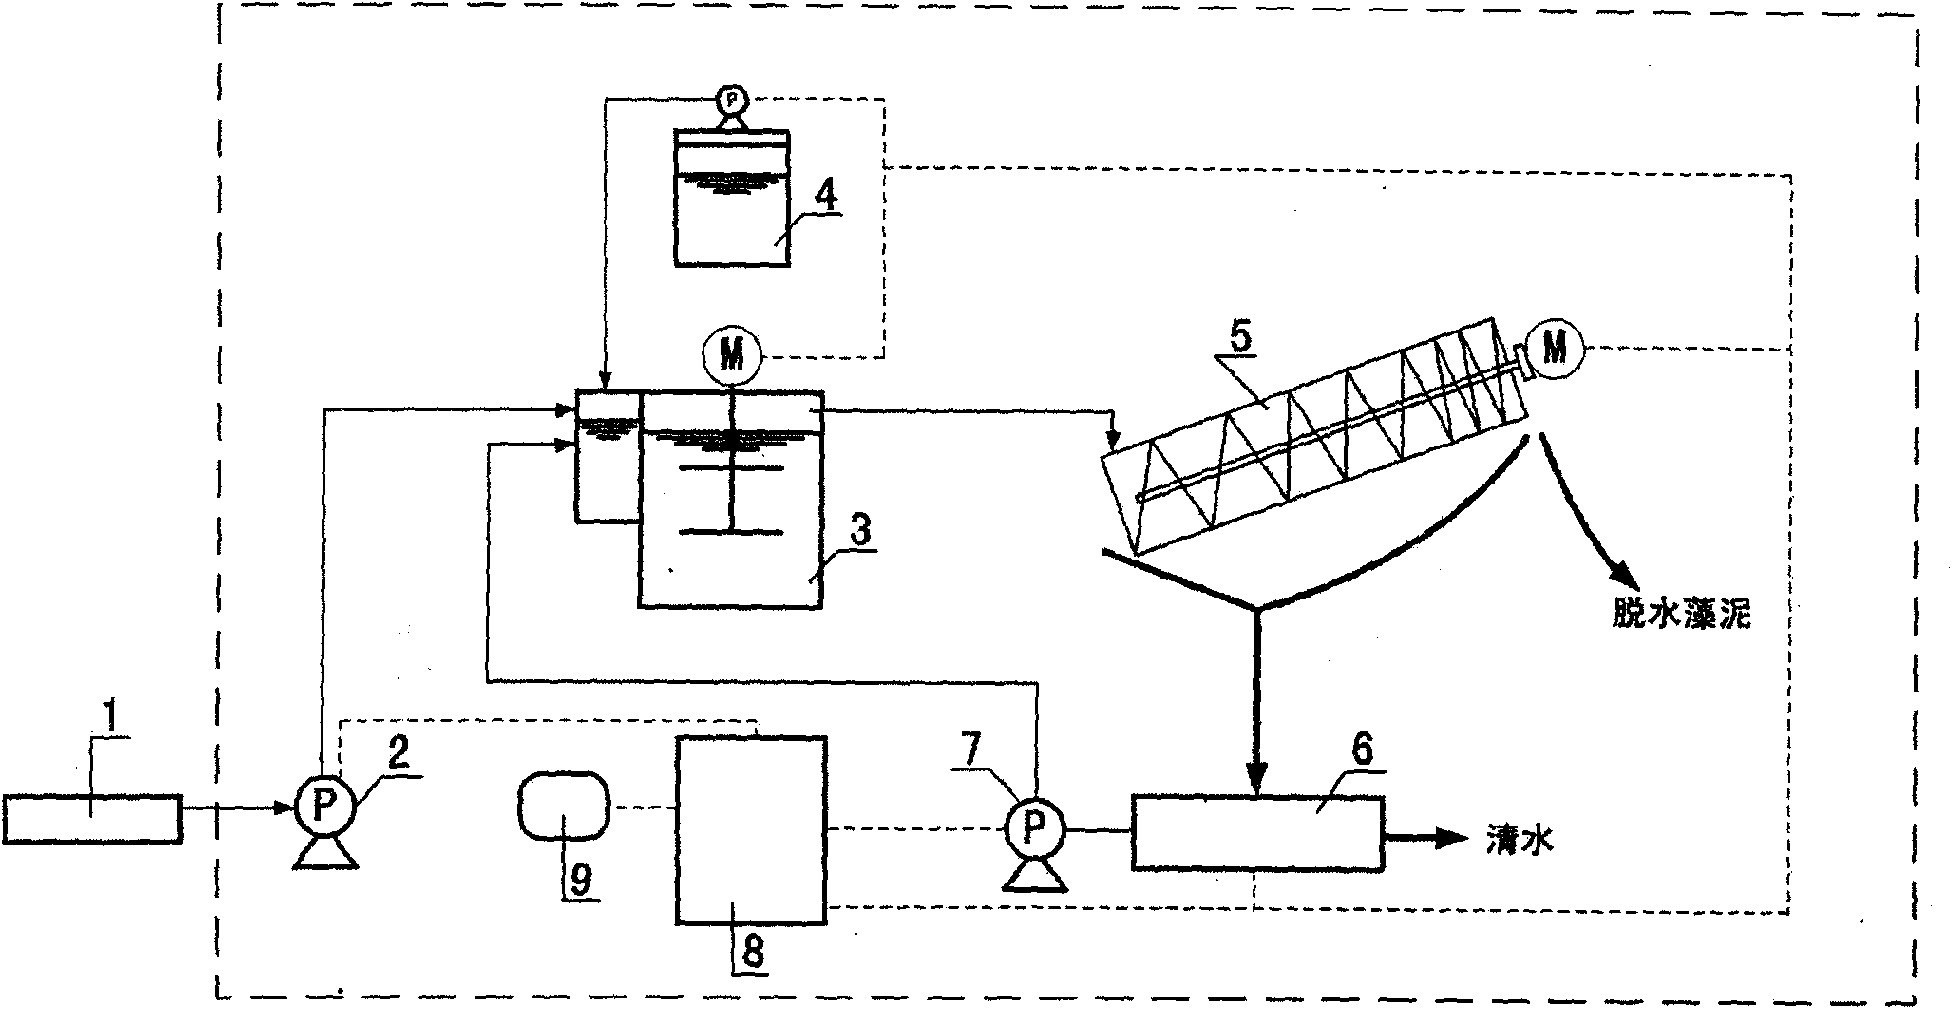 Movable device for effectively collecting and processing algae pollutant